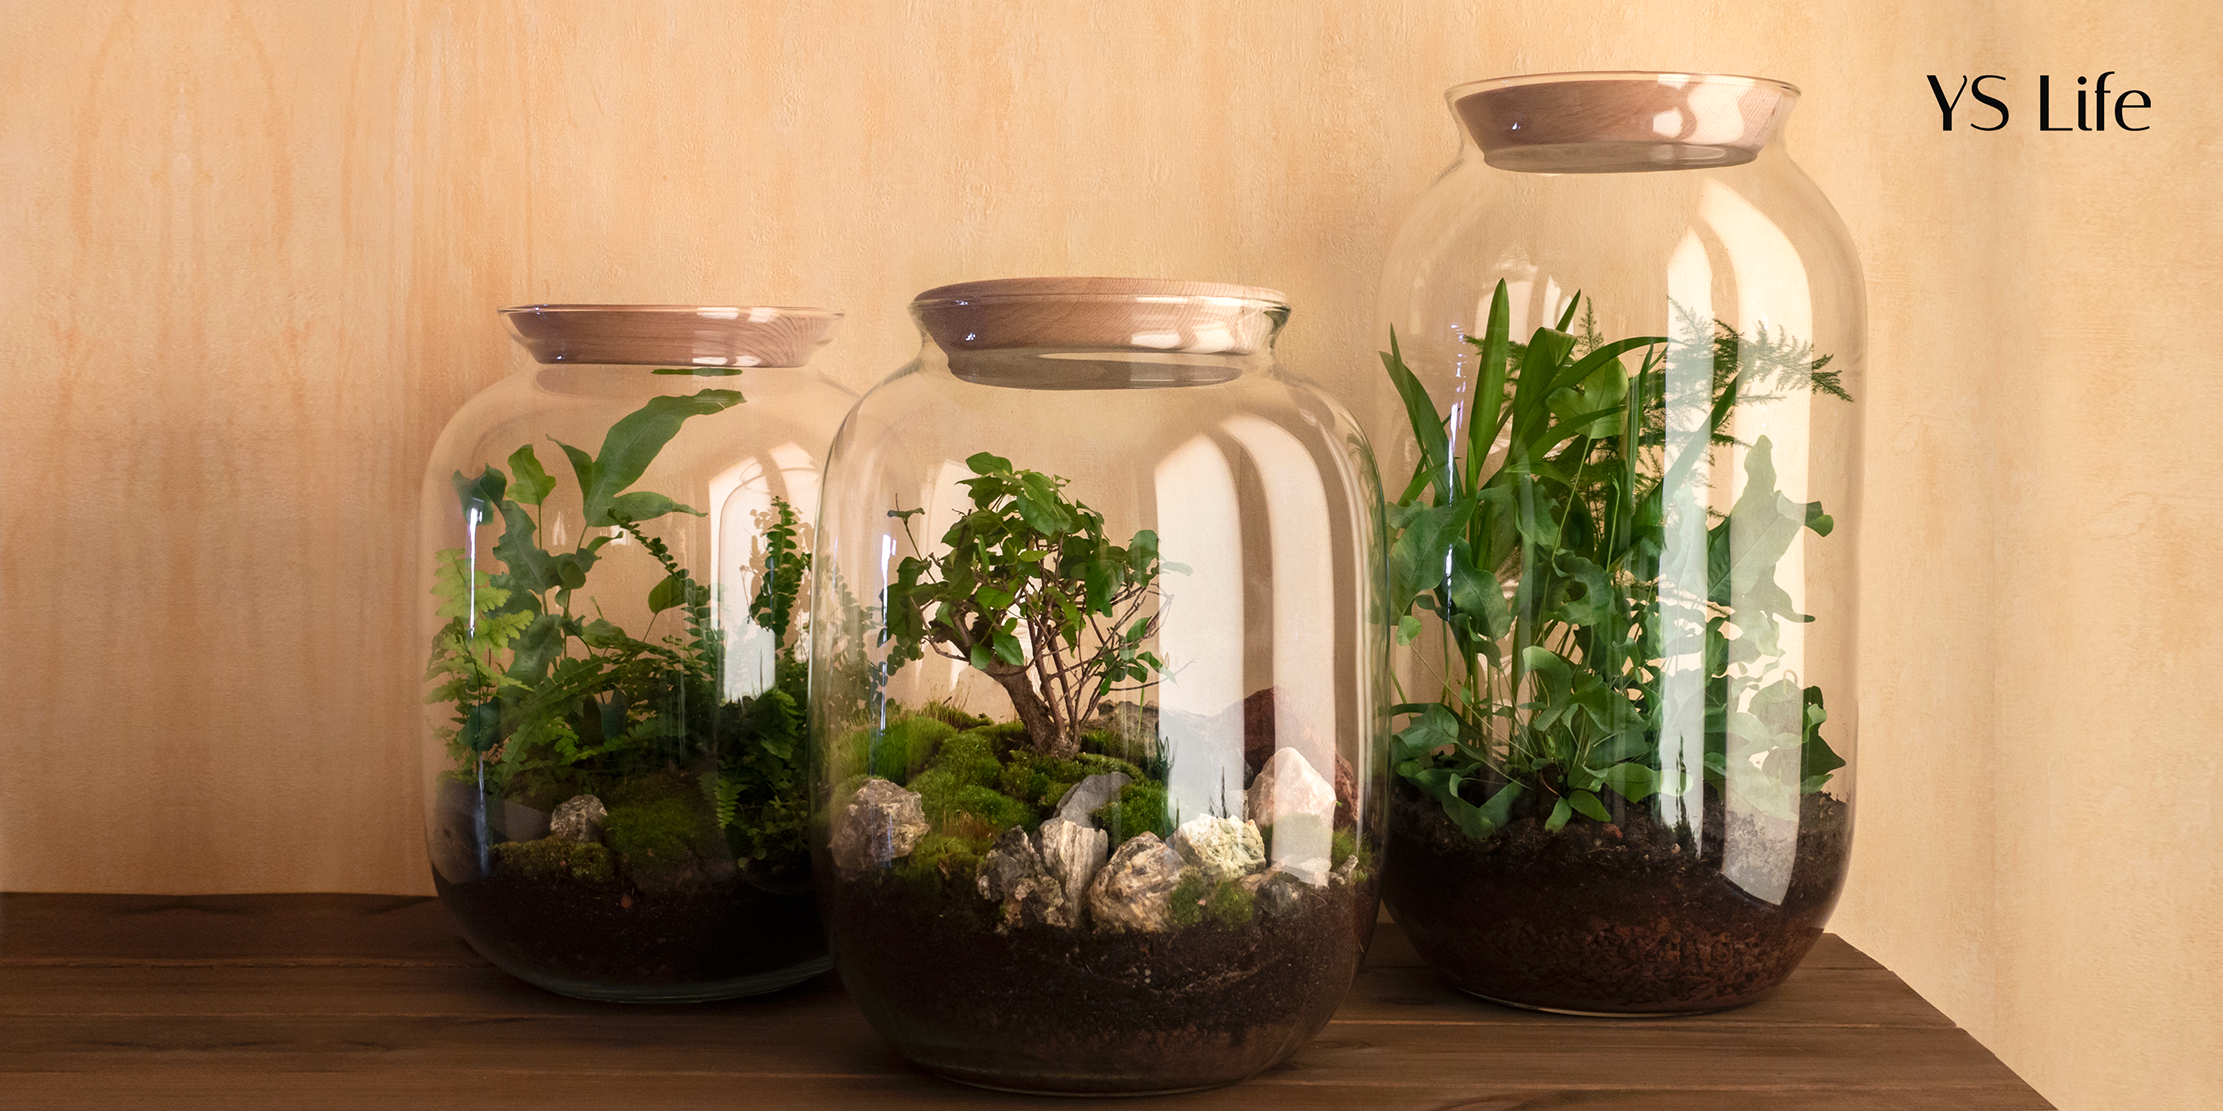 Creating your own green patch with terrariums